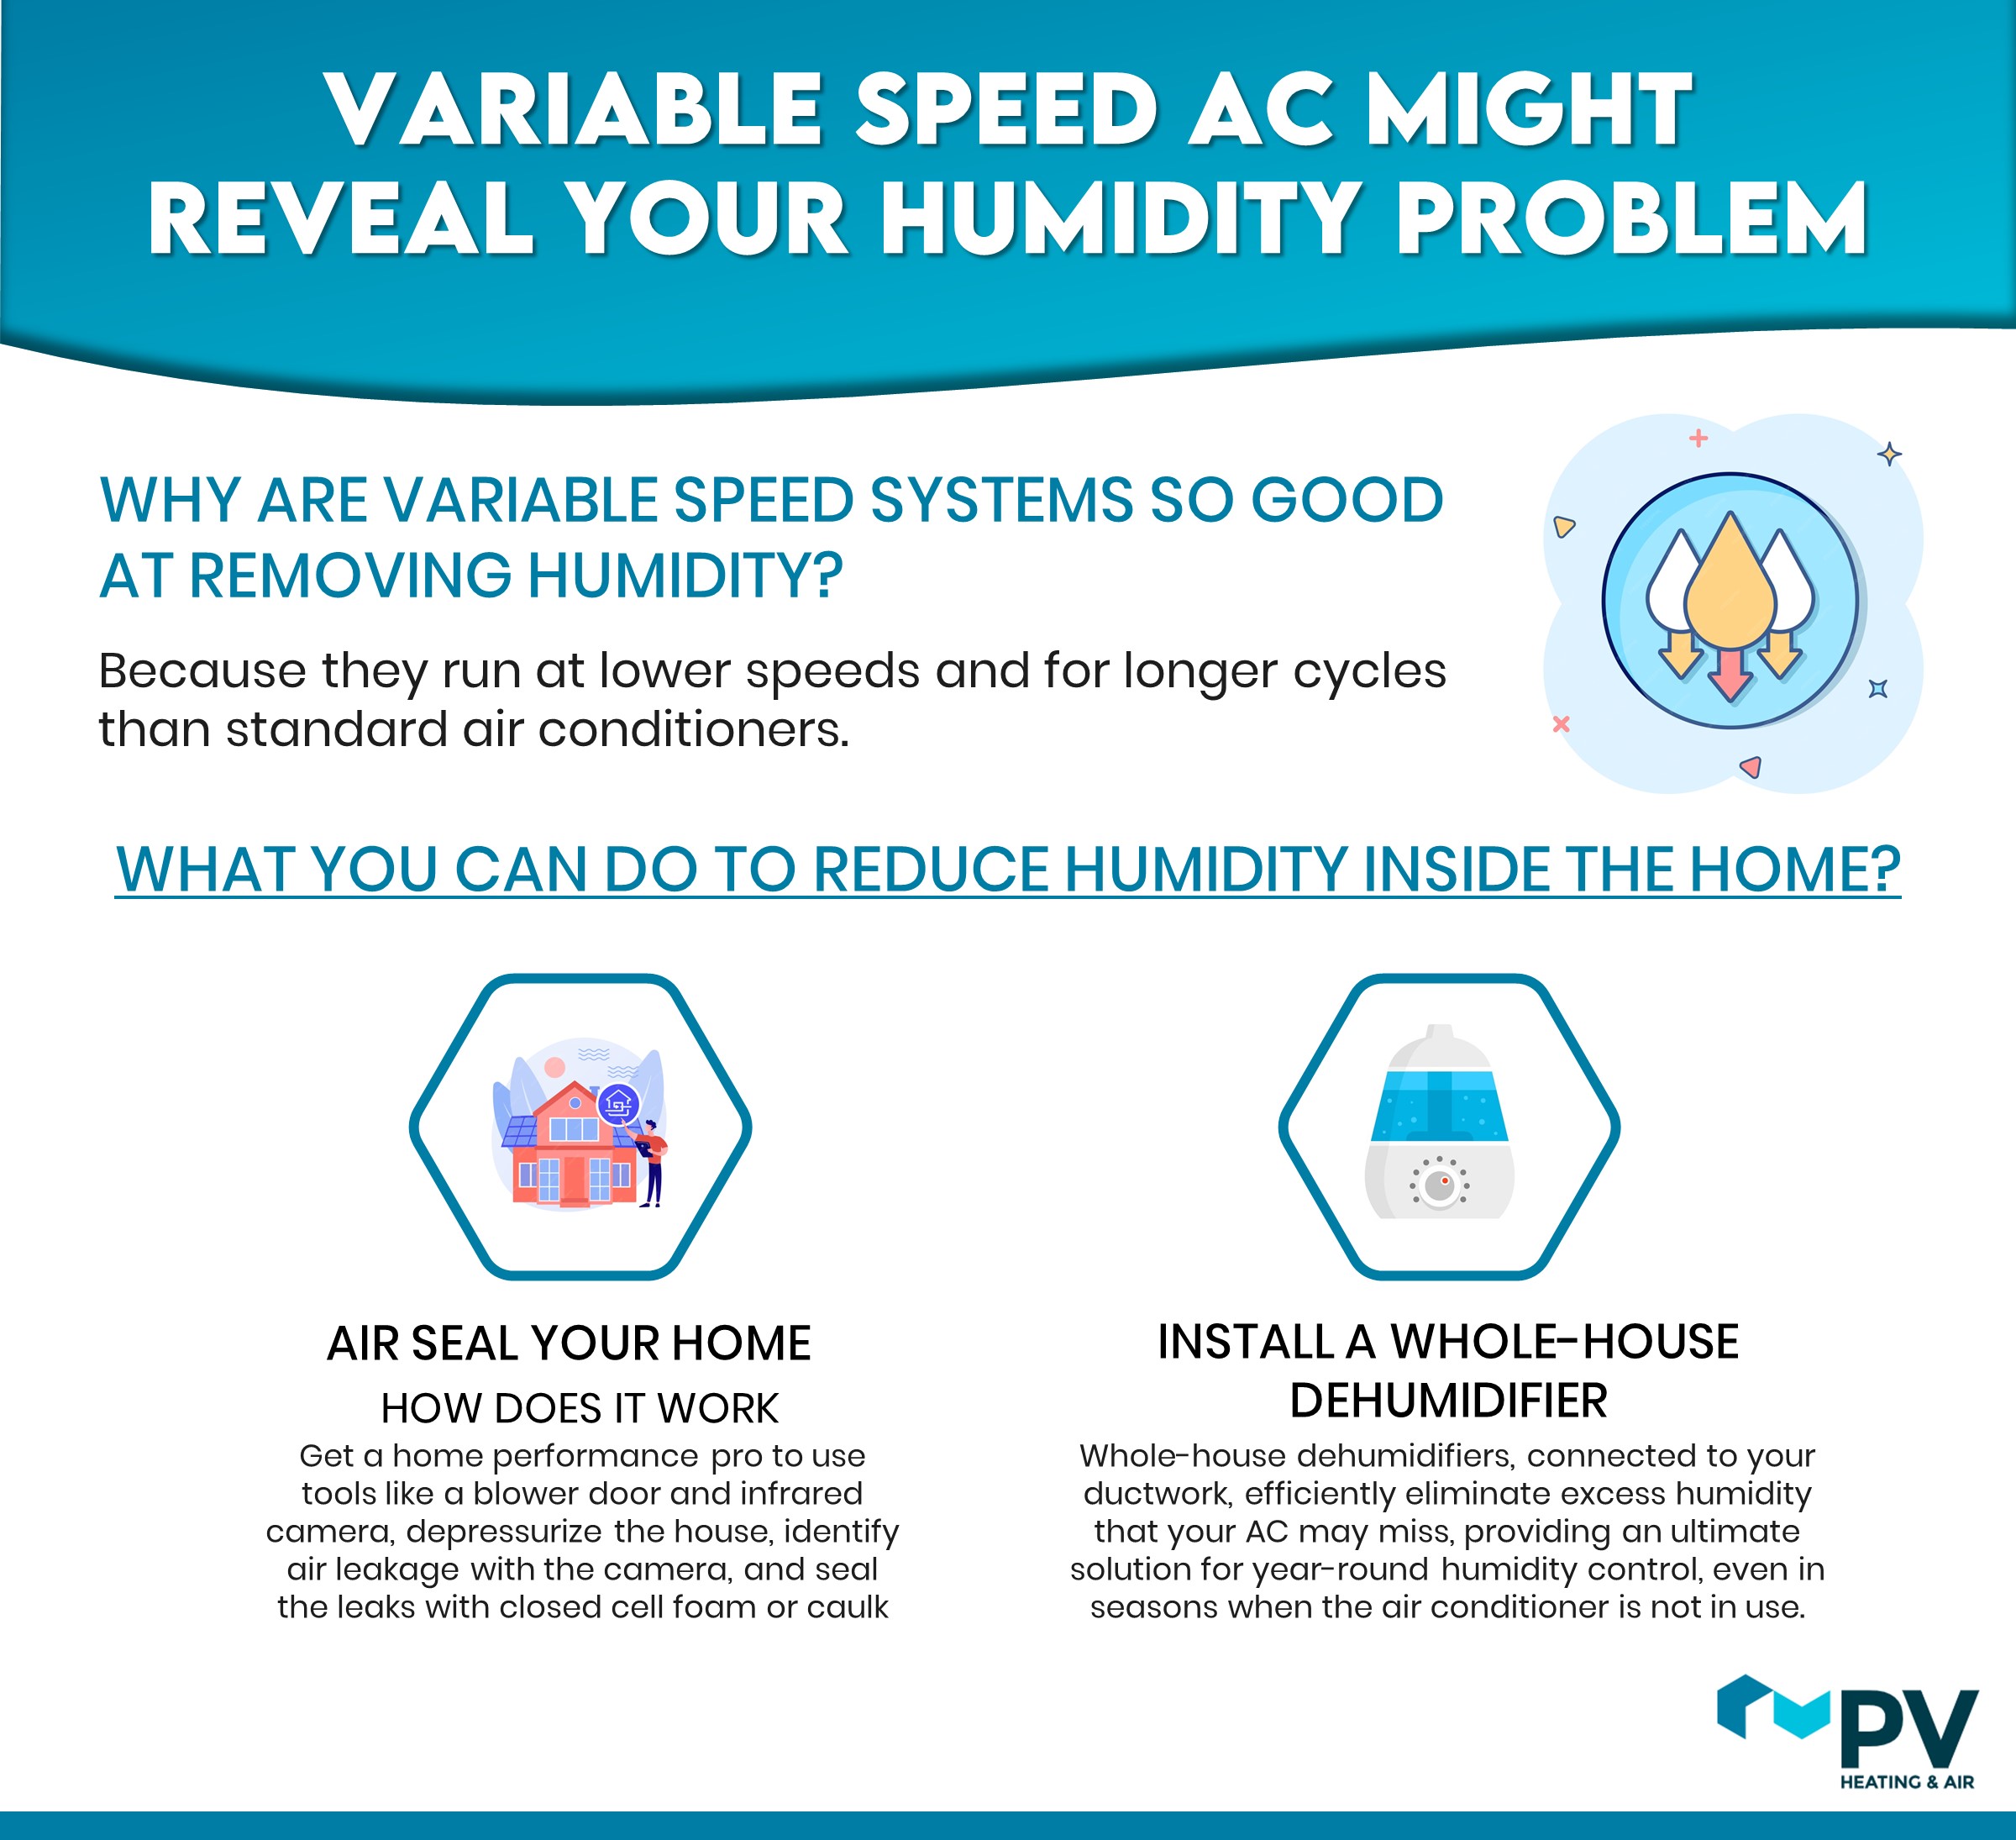 VARIABLE SPEED AC MIGHT REVEAL YOUR HUMIDITY PROBLEM